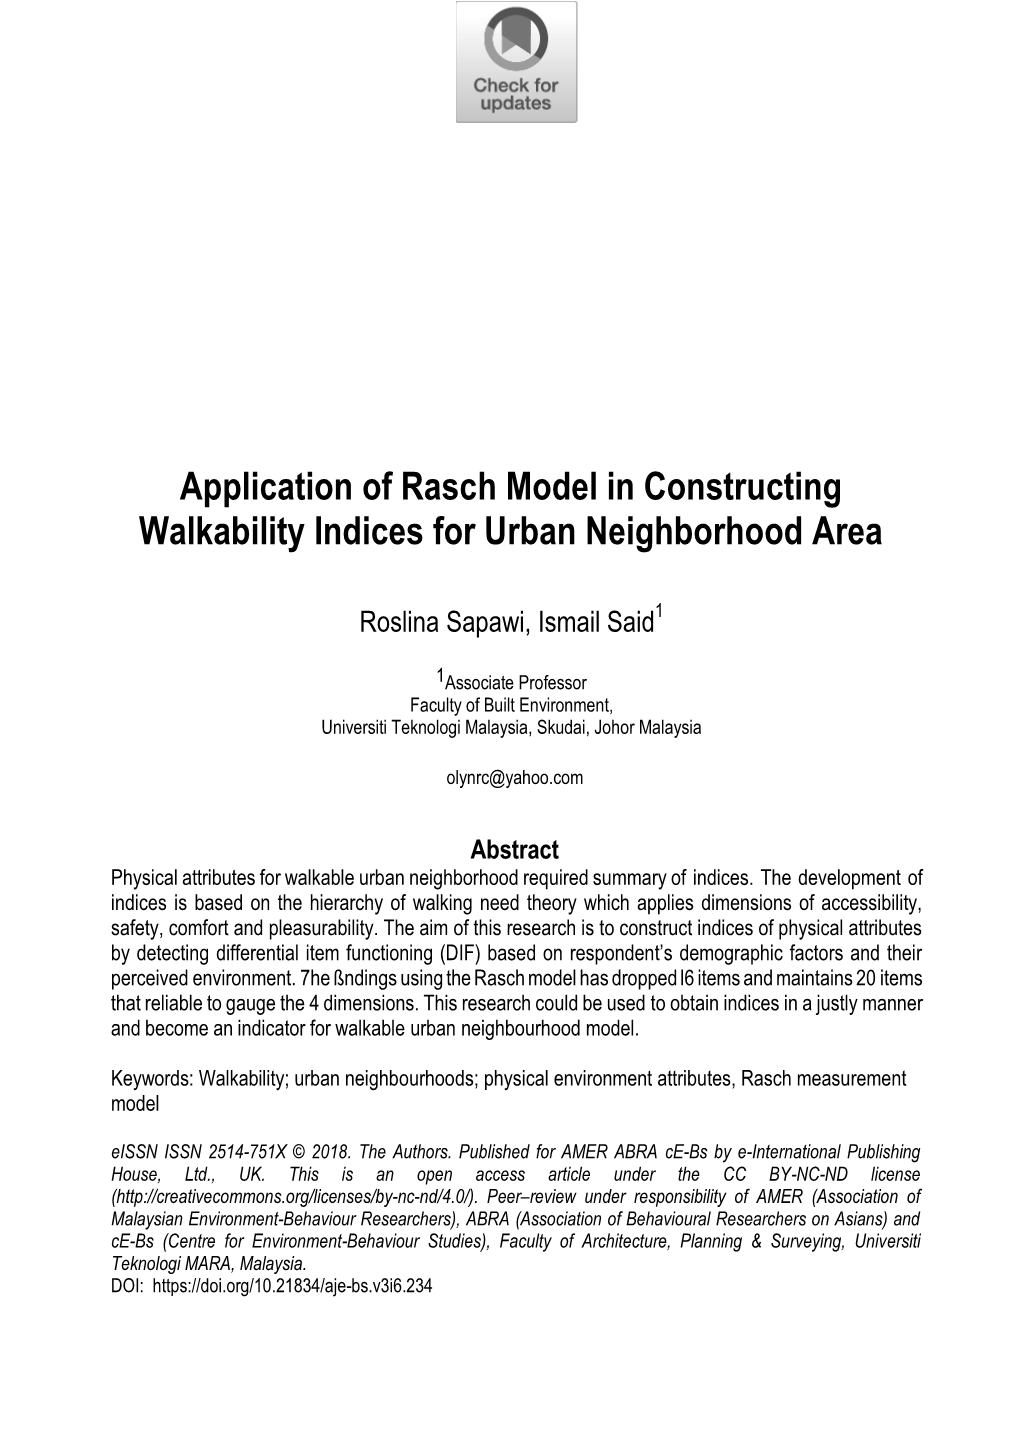 Application of Rasch Model in Constructing Walkability Indices for Urban Neighborhood Area